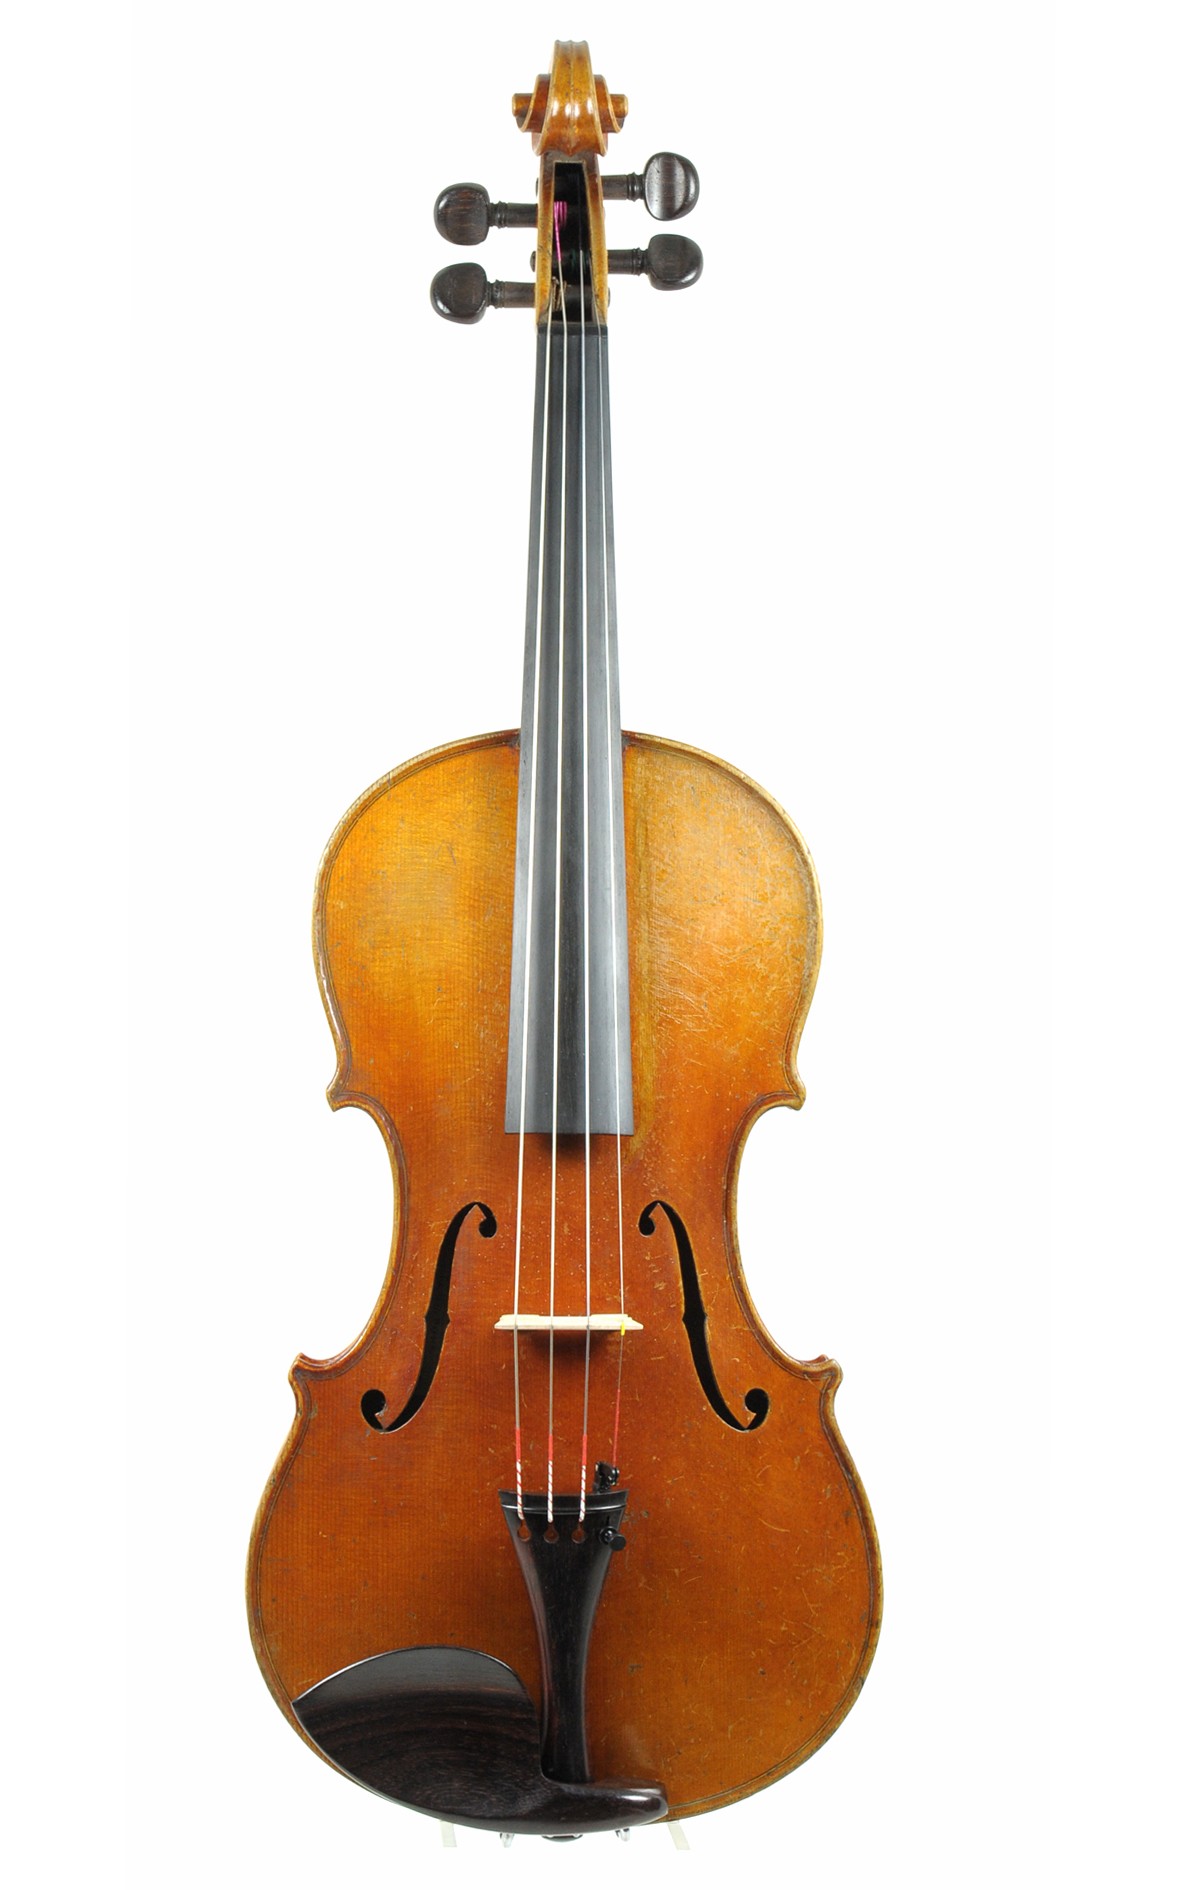 J. A. Baader, Maggini violin Nr. 906 dated 1898 - top